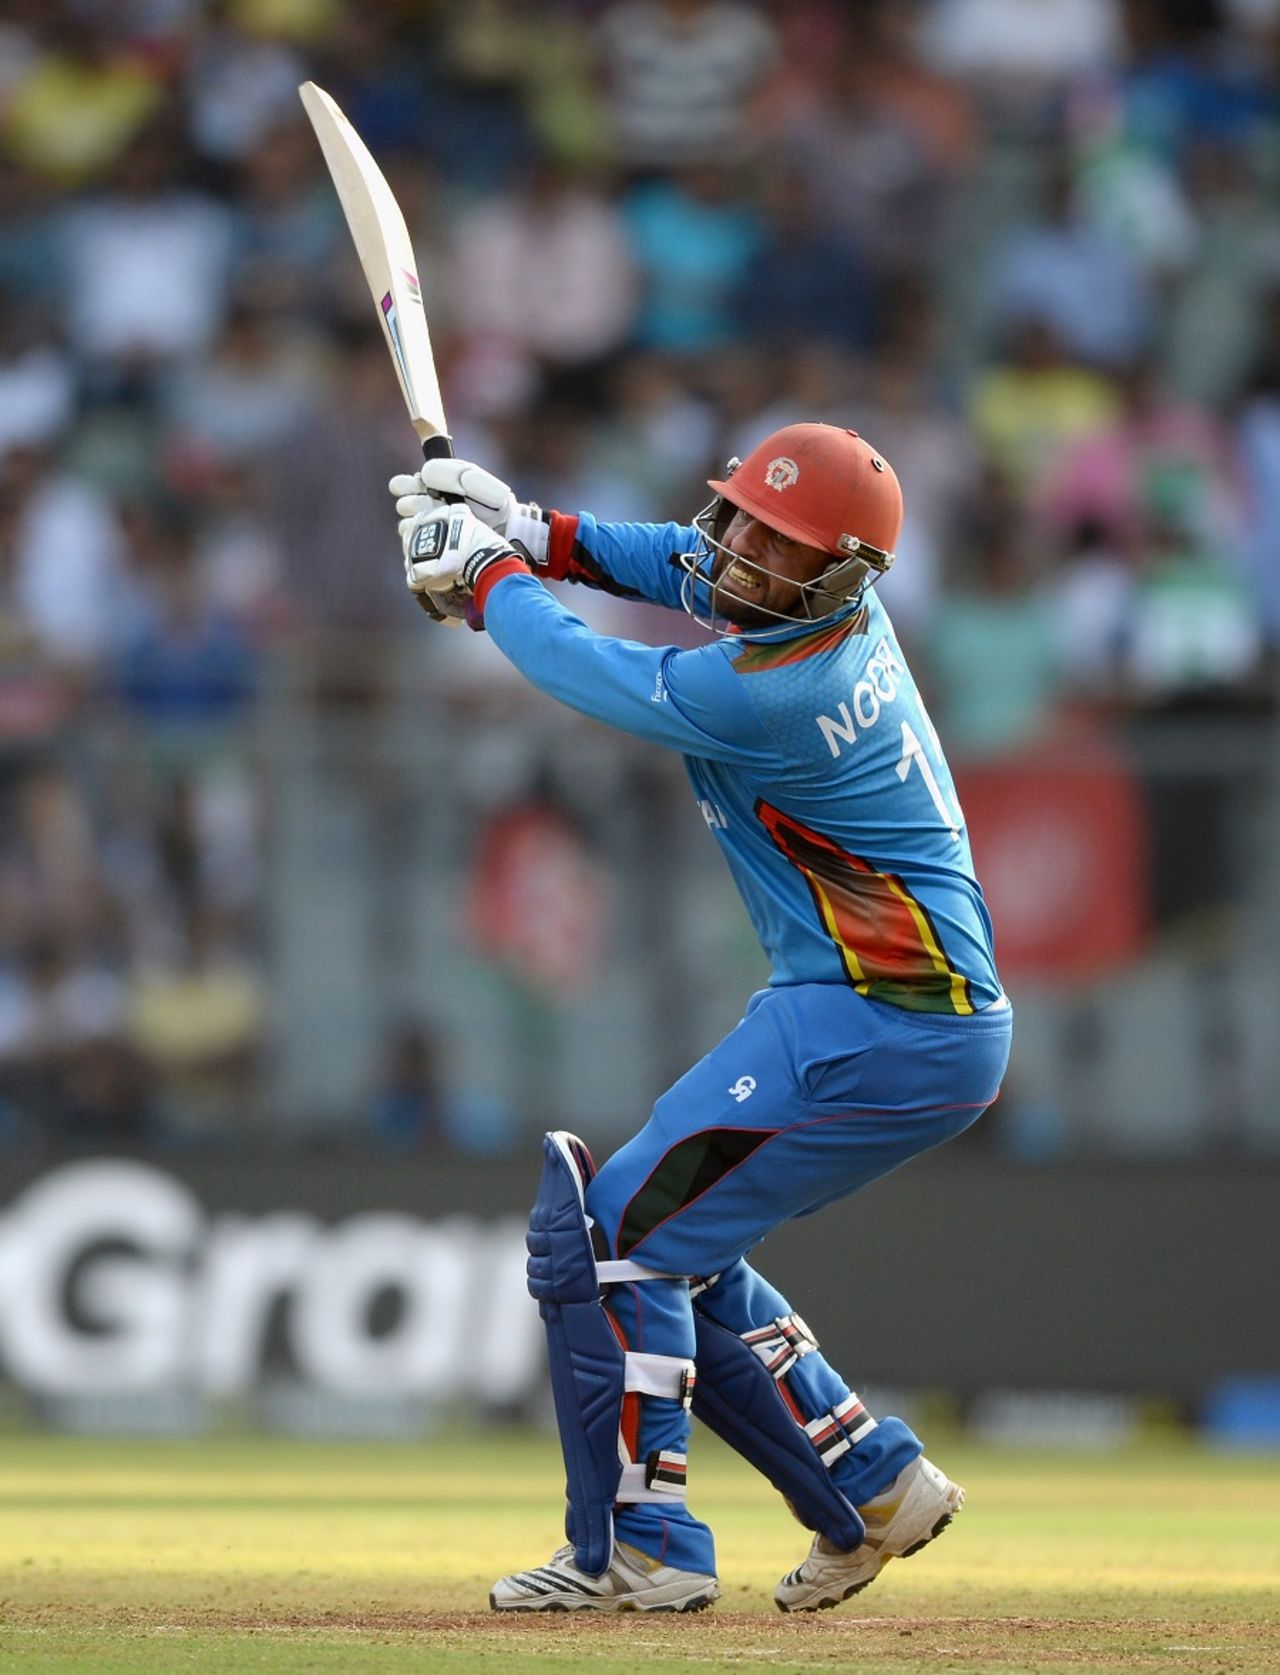 Noor Ali Zadran throws his bat at the ball, Afghanistan v South Africa, World T20 2016, Group 1, Mumbai, March 20,2016